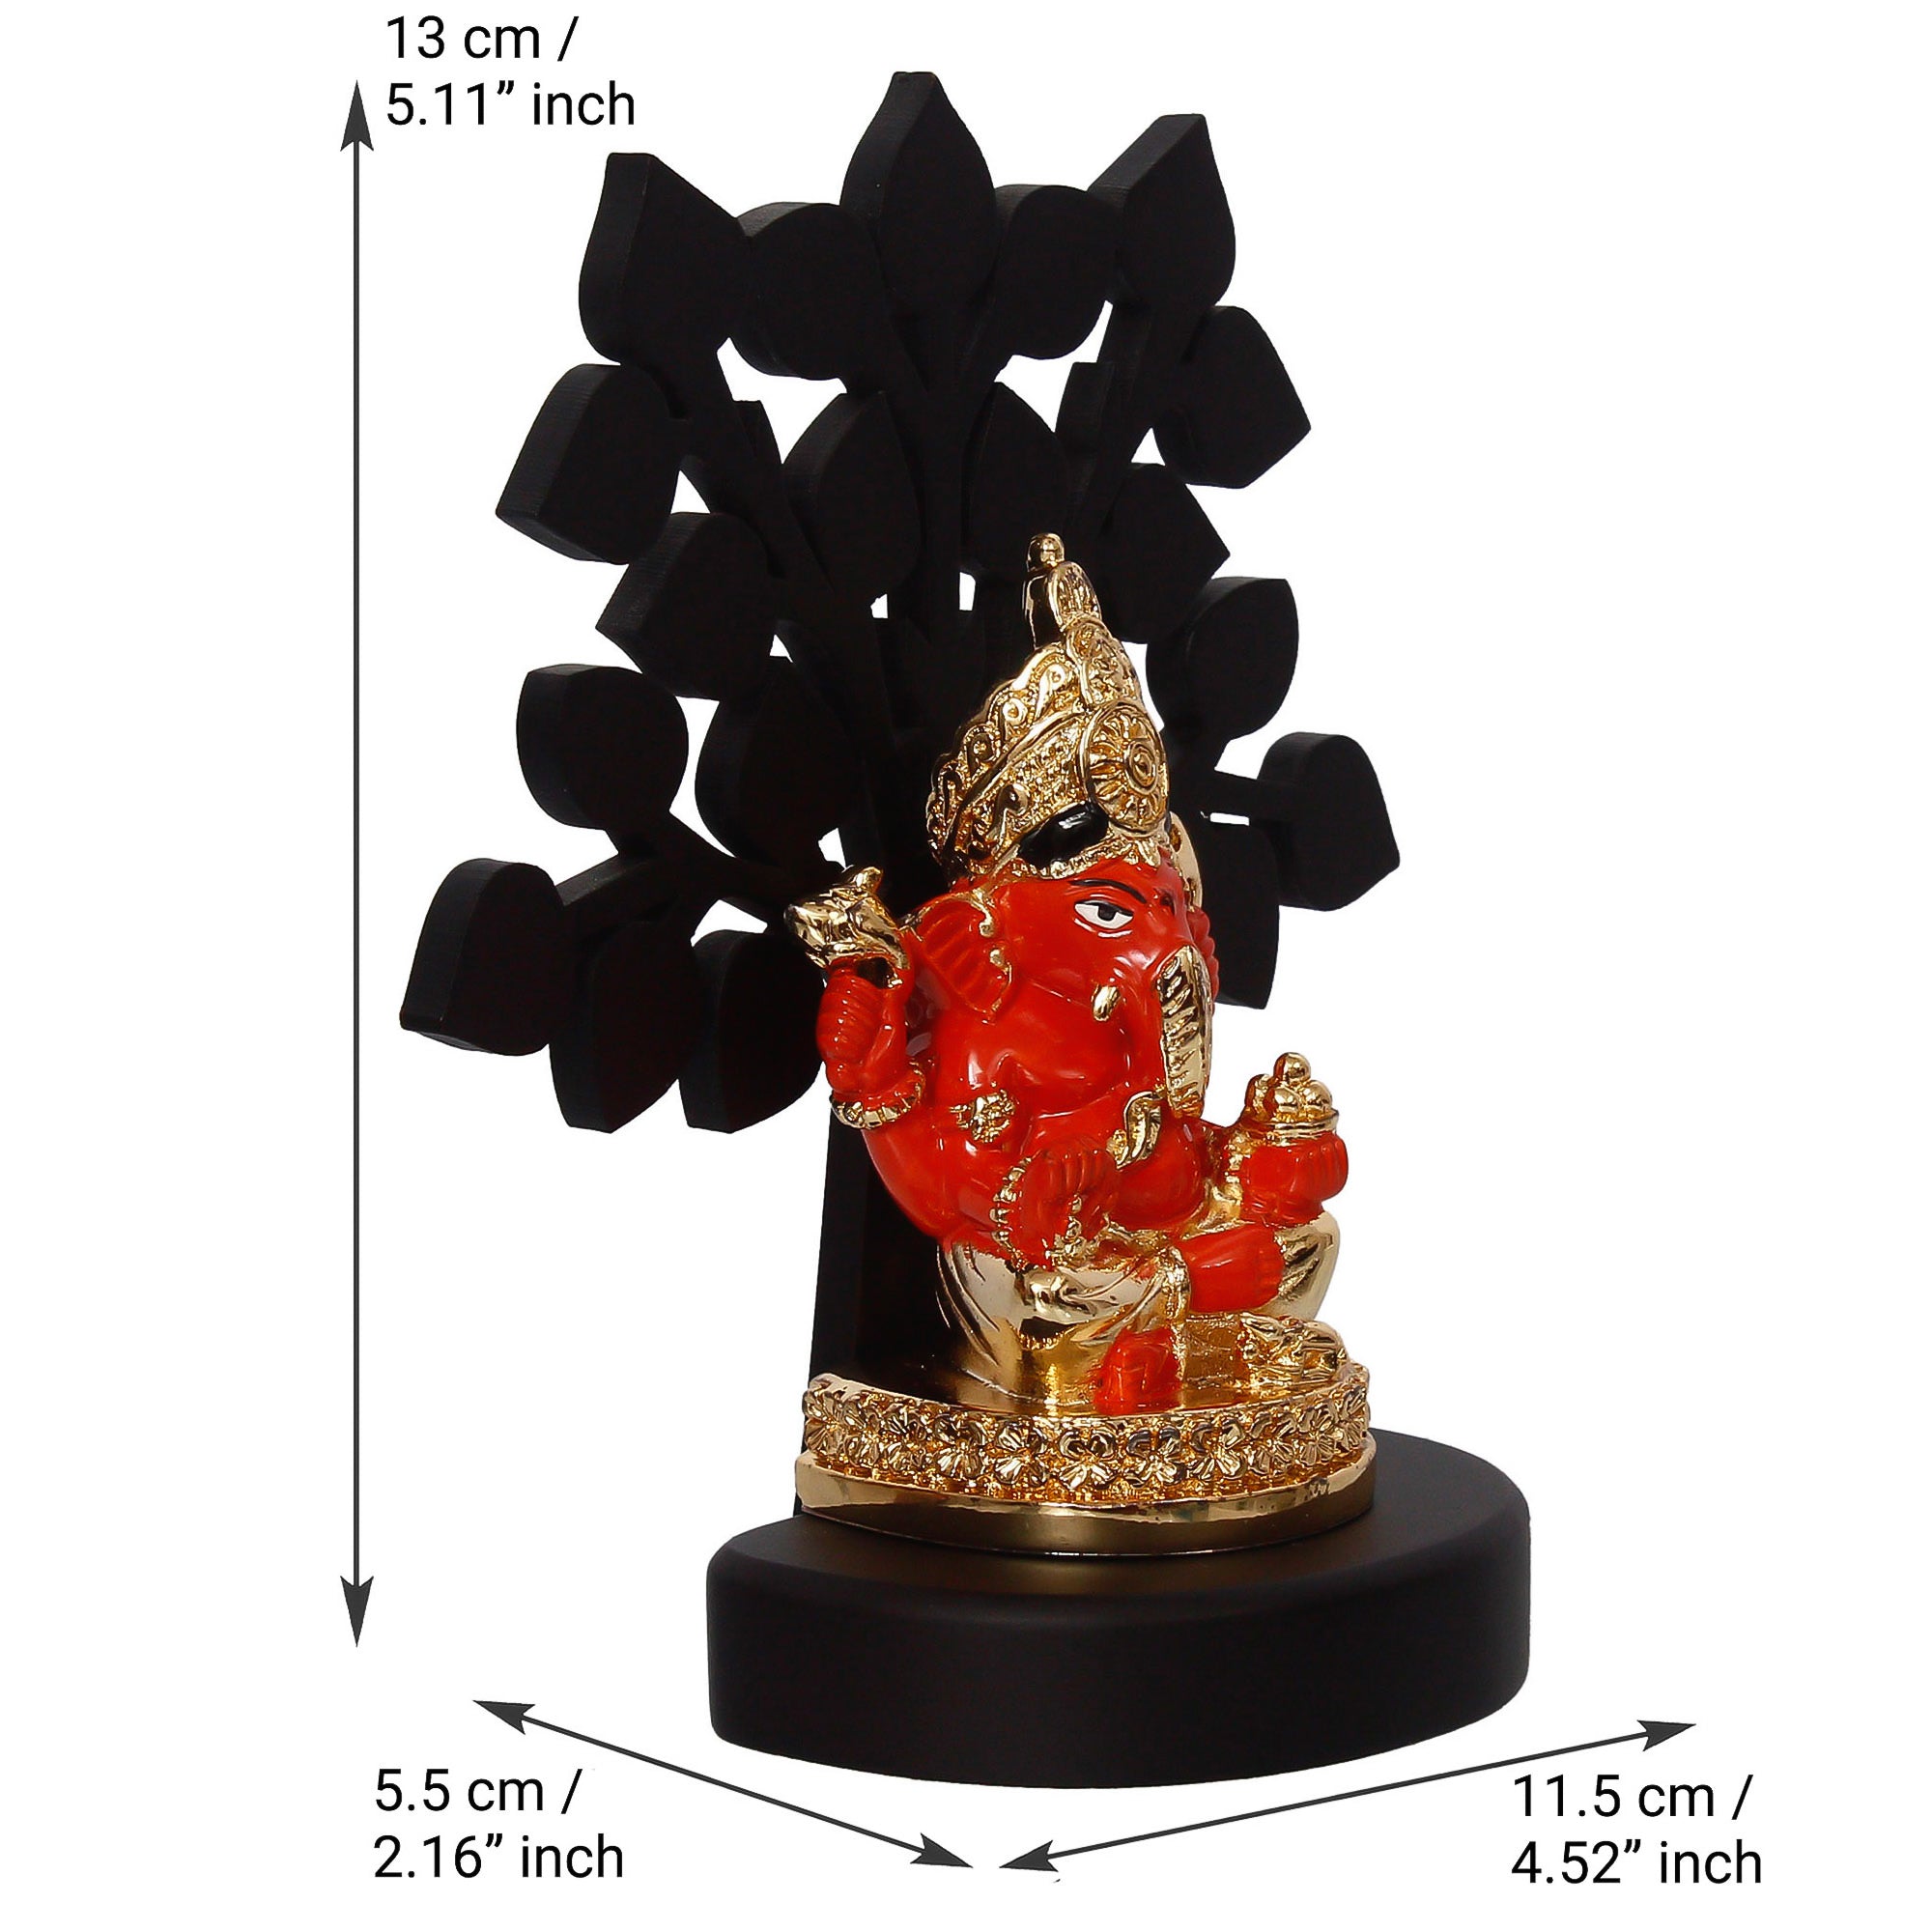 Gold Plated Orange Polyresin Ganesha Idol with Wooden Tree for Home, Temple, Office and Car Dashboard 4